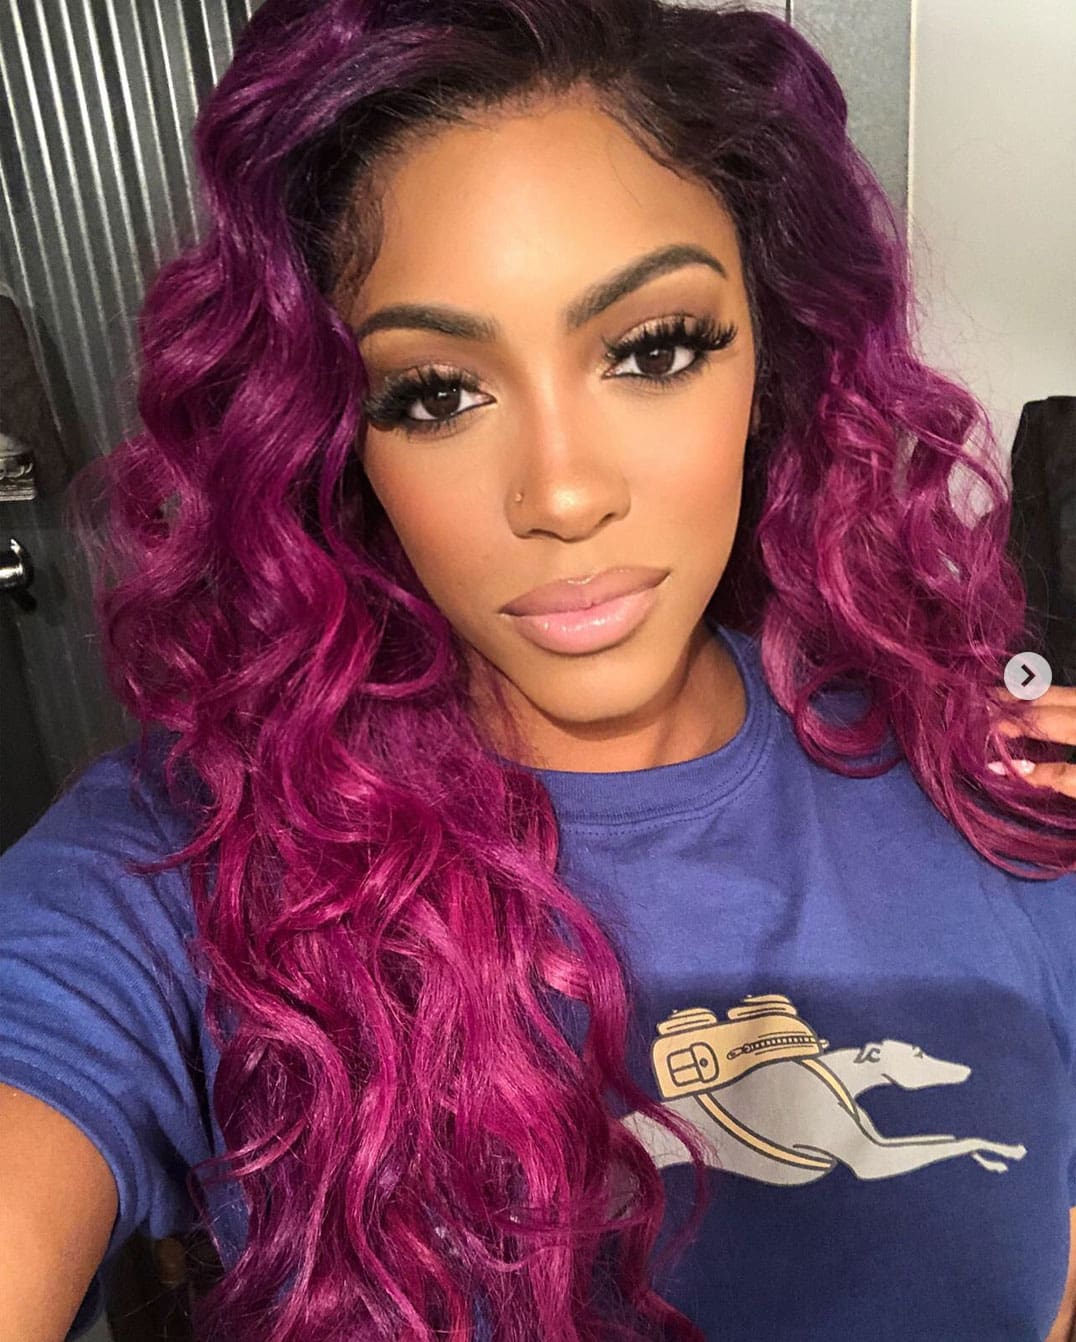 Porsha Williams Looks Gorgeous In Lavender - Check Out Her Jaw-Dropping Outfit